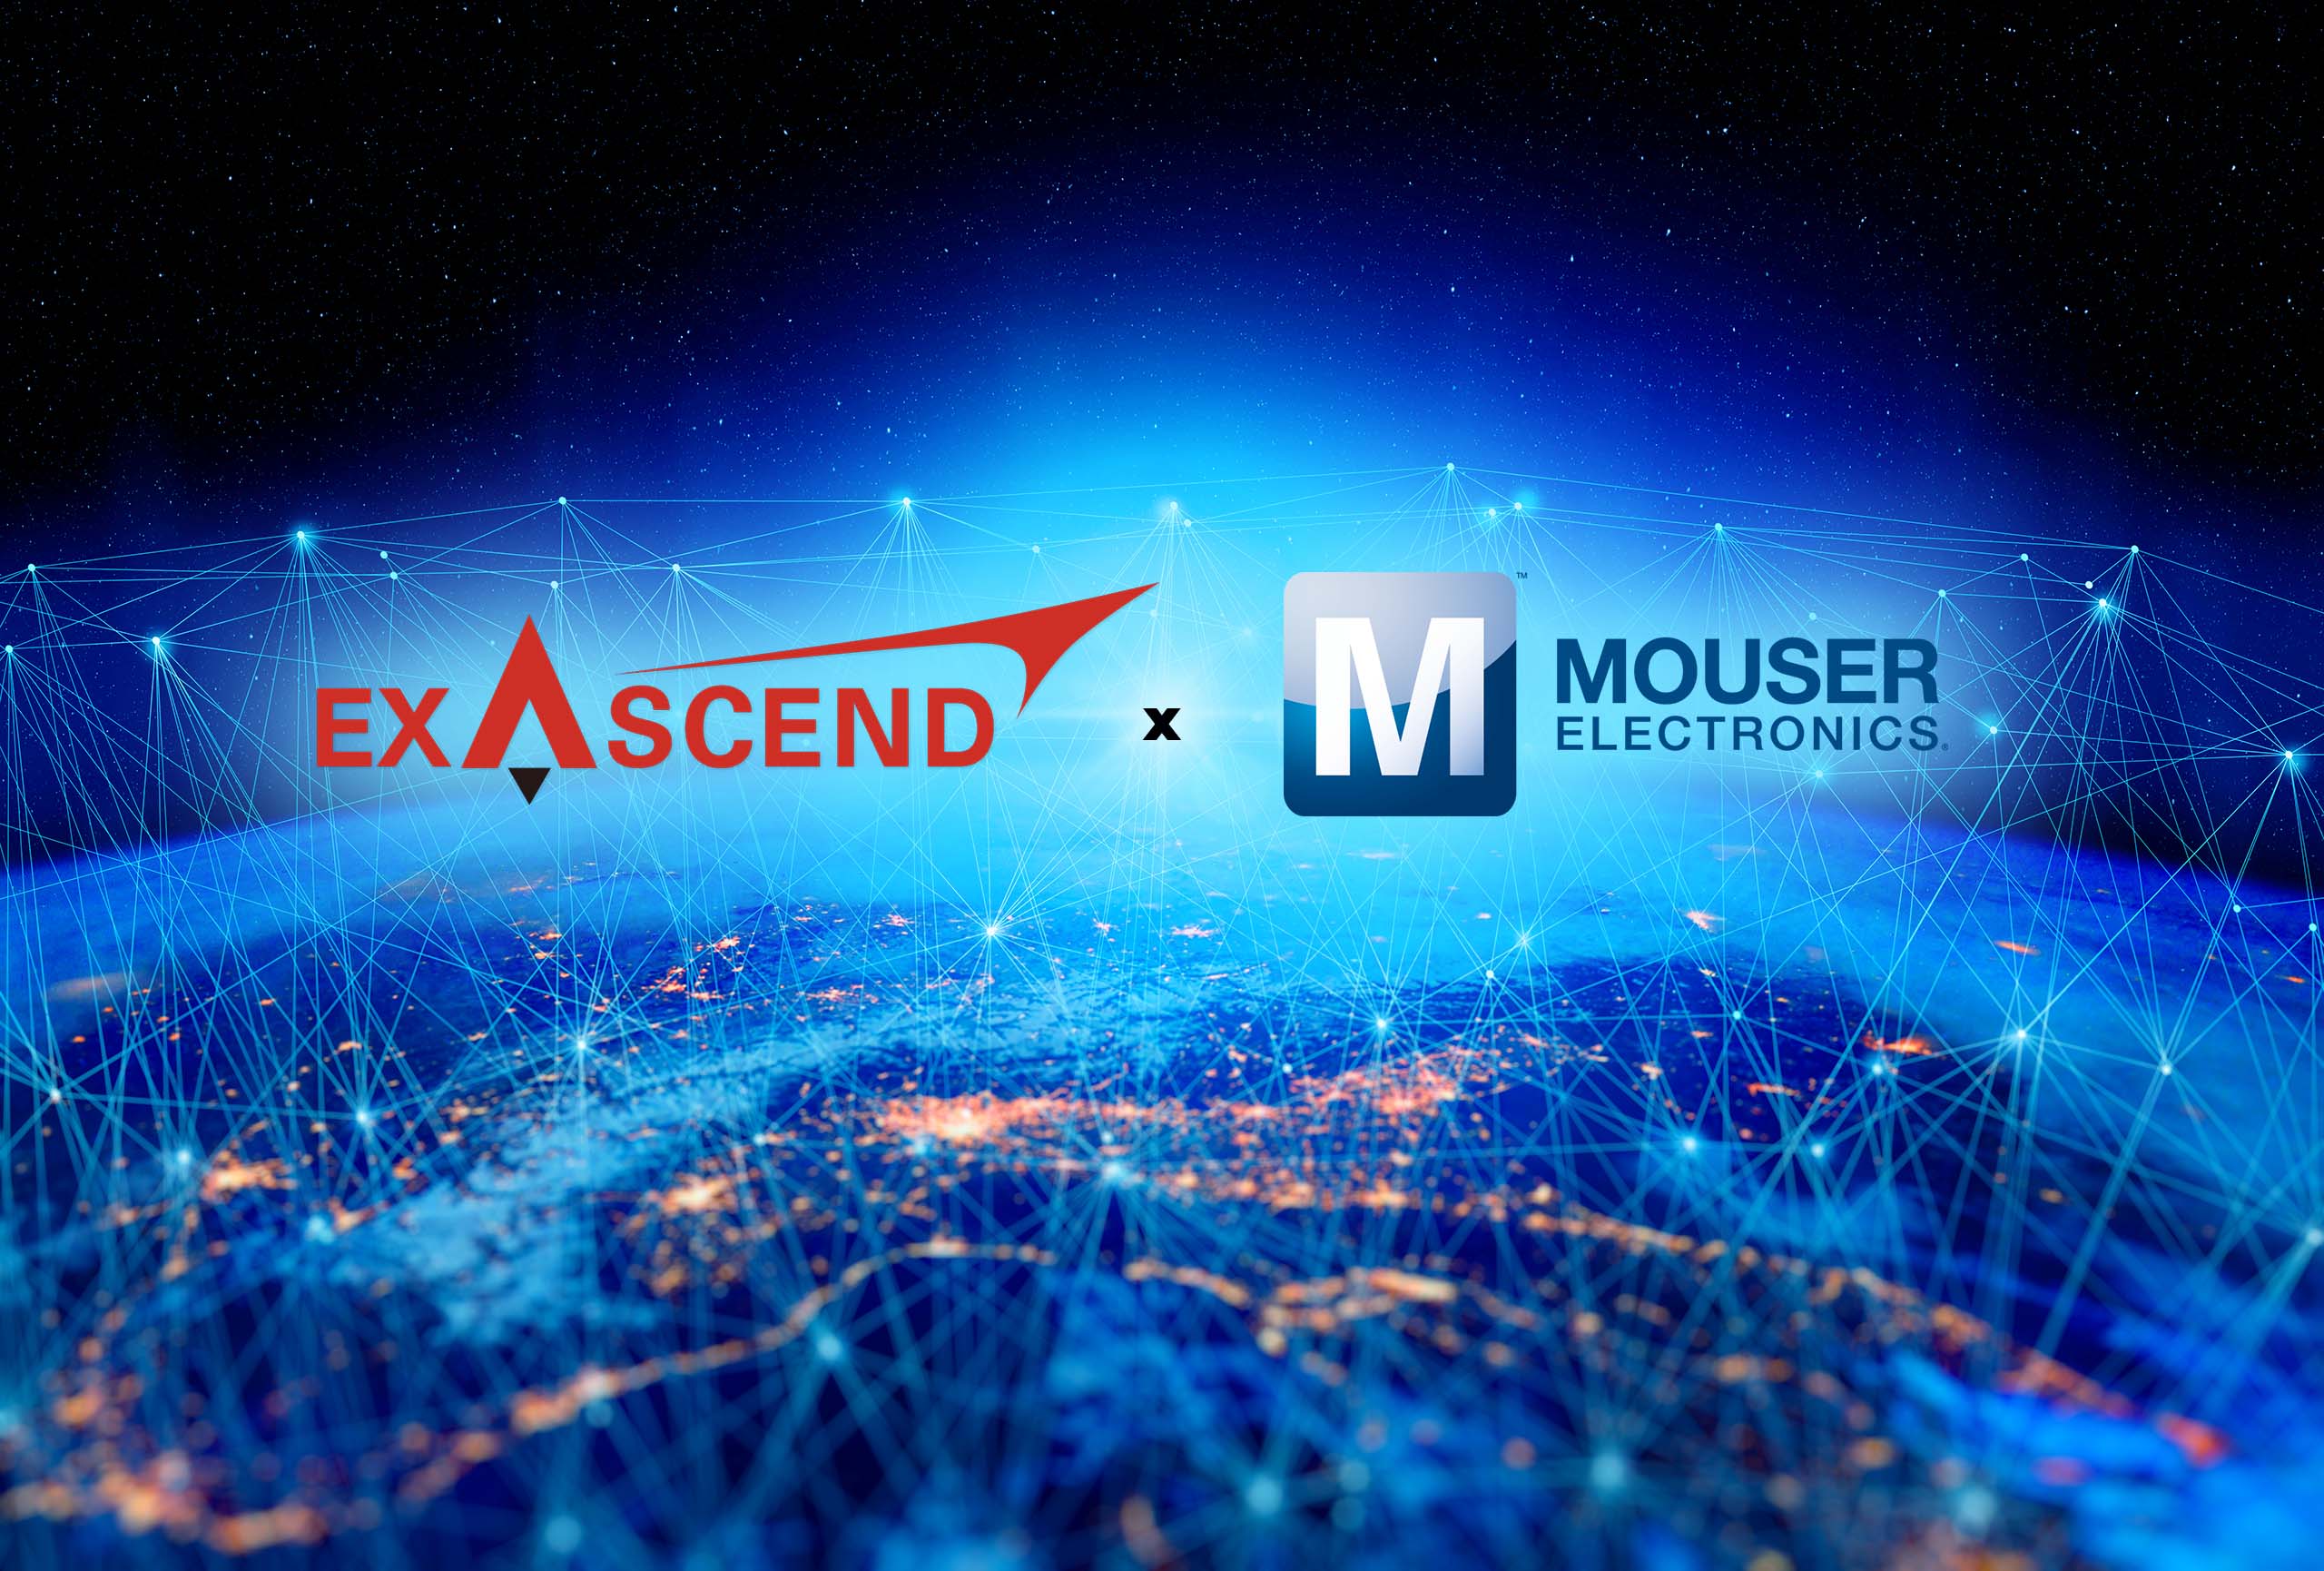 Exascend's partnership with Mouser Electronics illustrated with an interconnected globe.